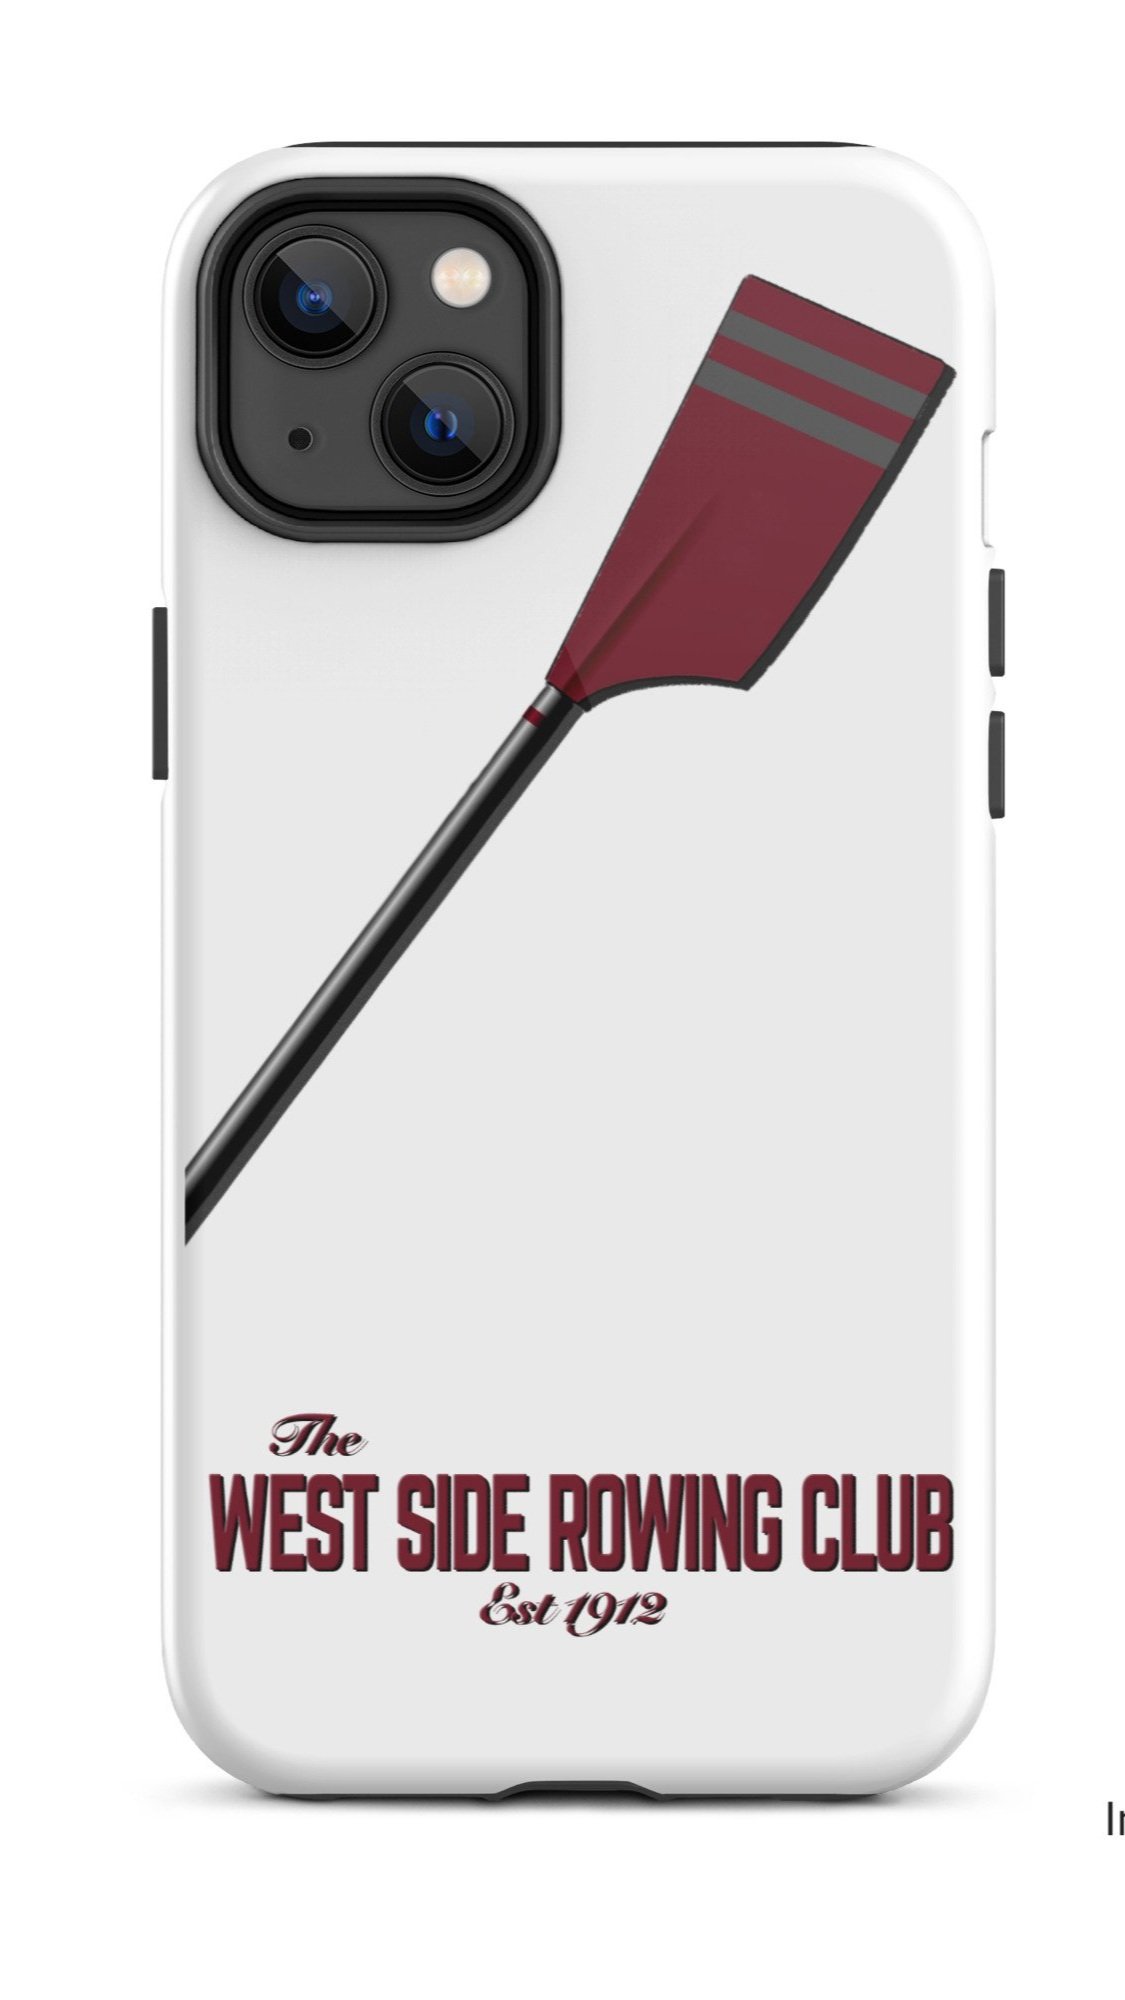 WSRC iPhone Case — West Side Rowing Club